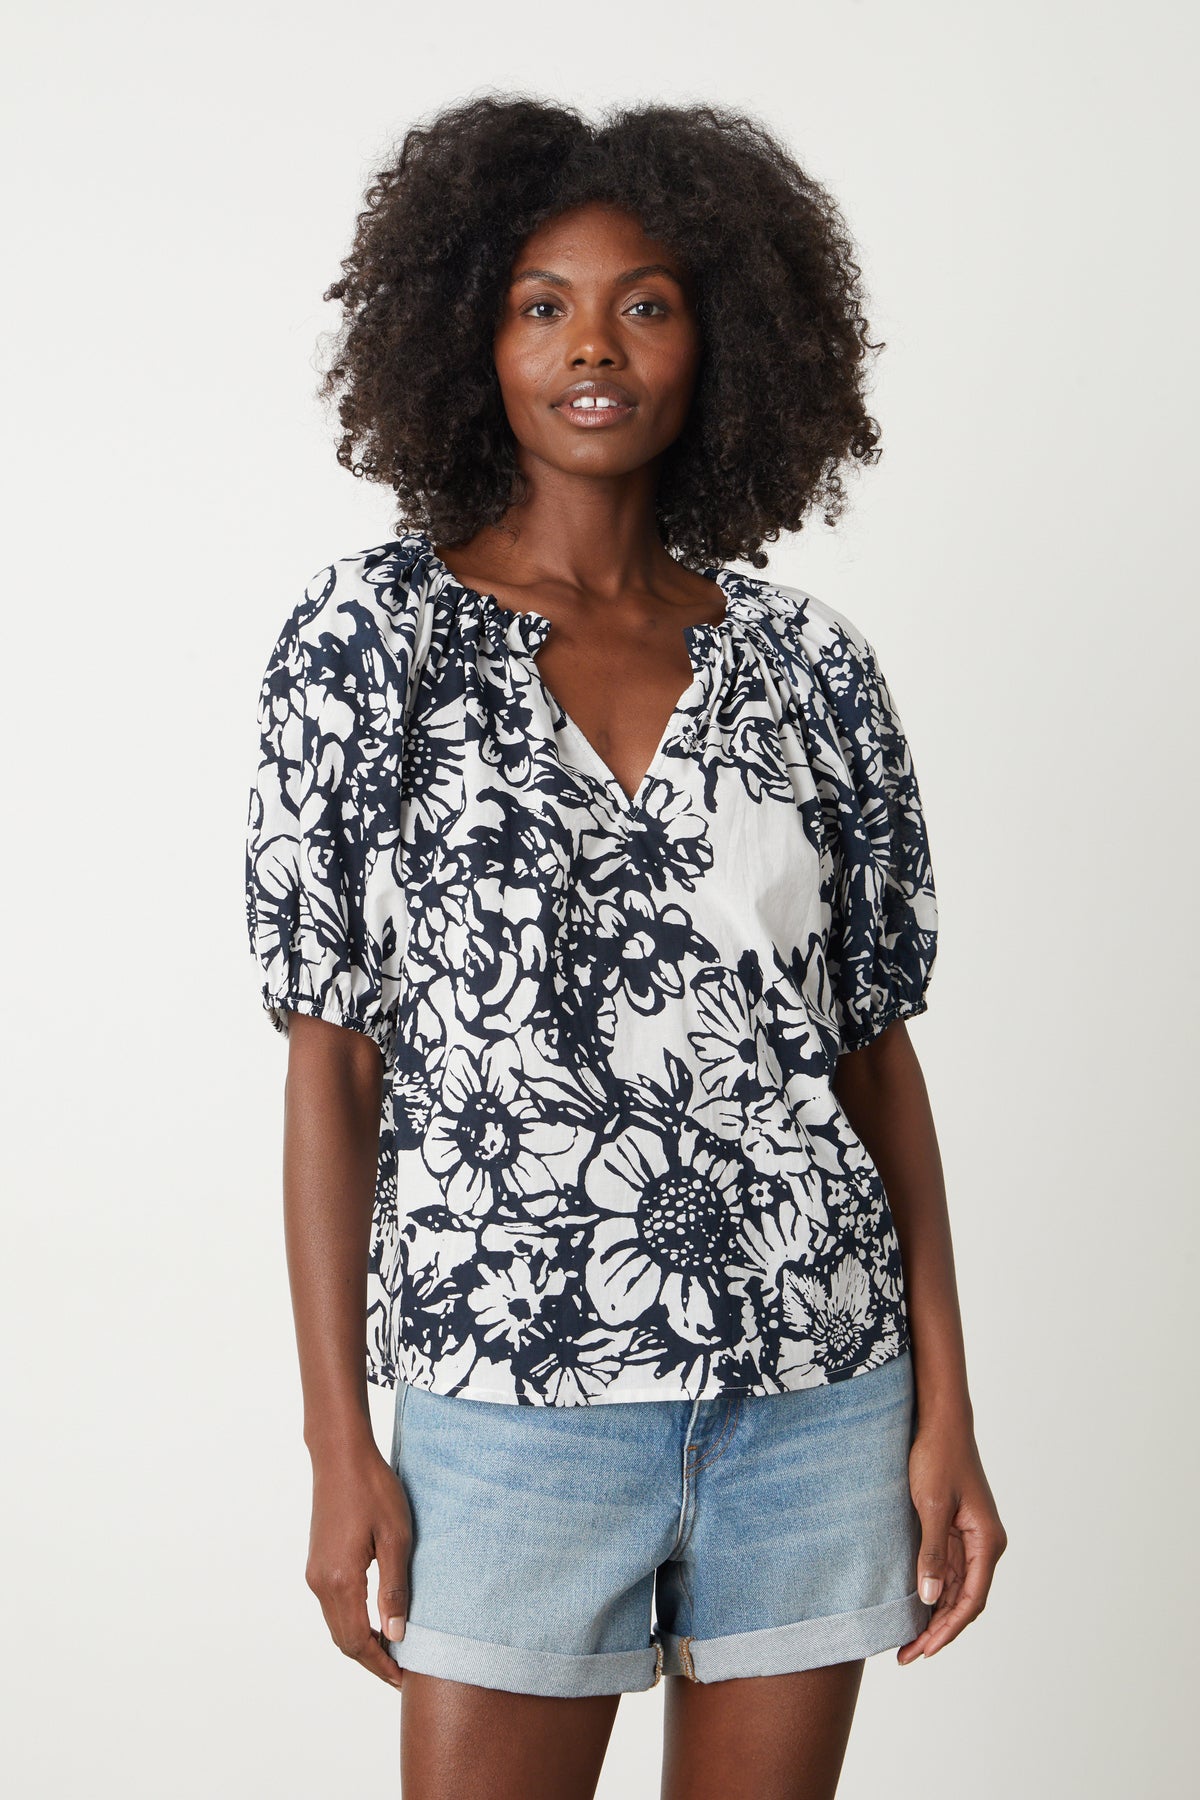   The model is wearing an ANGELA PRINTED BOHO TOP by Velvet by Graham & Spencer and denim shorts 